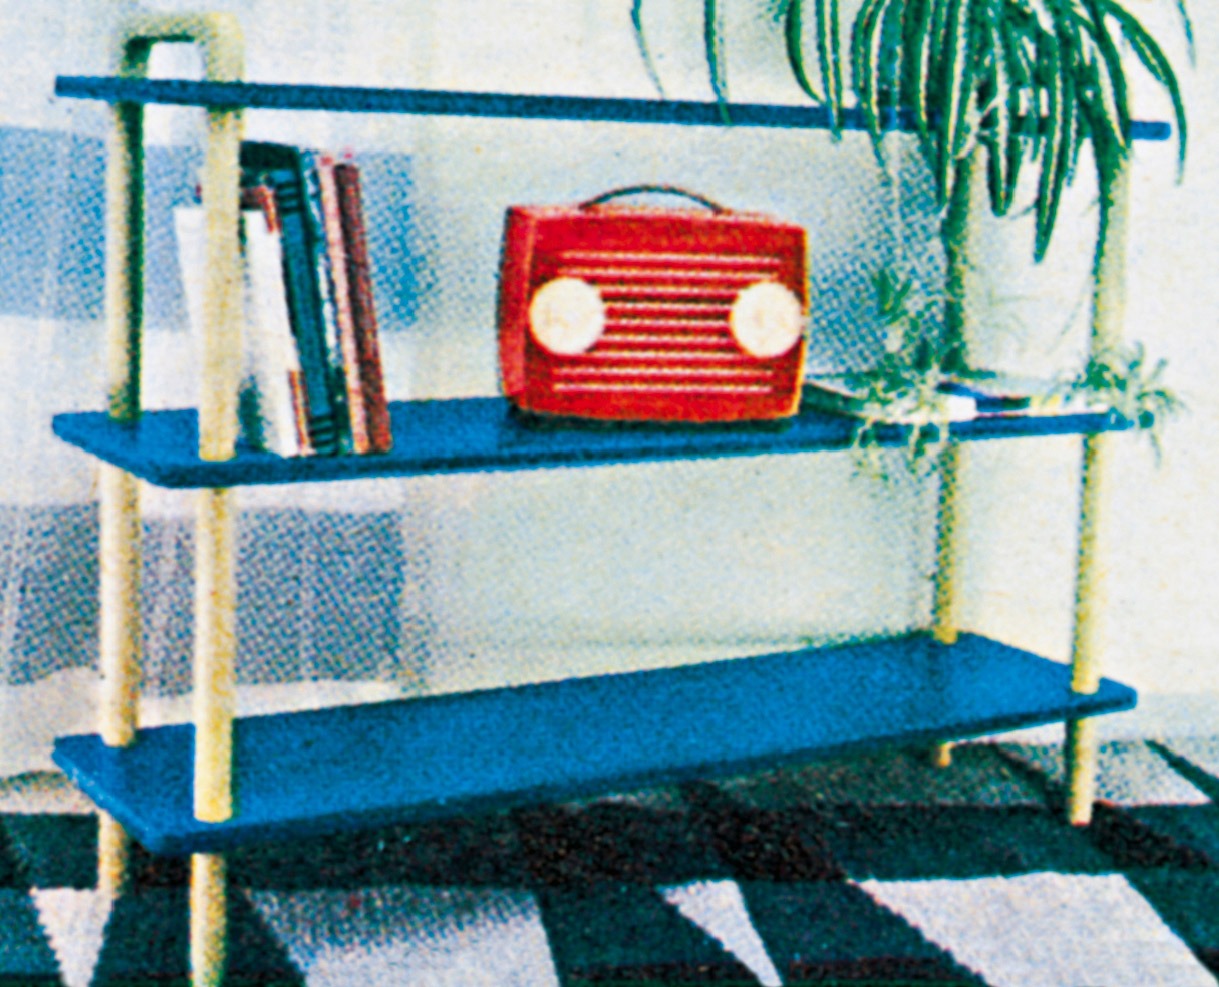 A red radio stands on a shelf in a blue-lacquered bookcase.